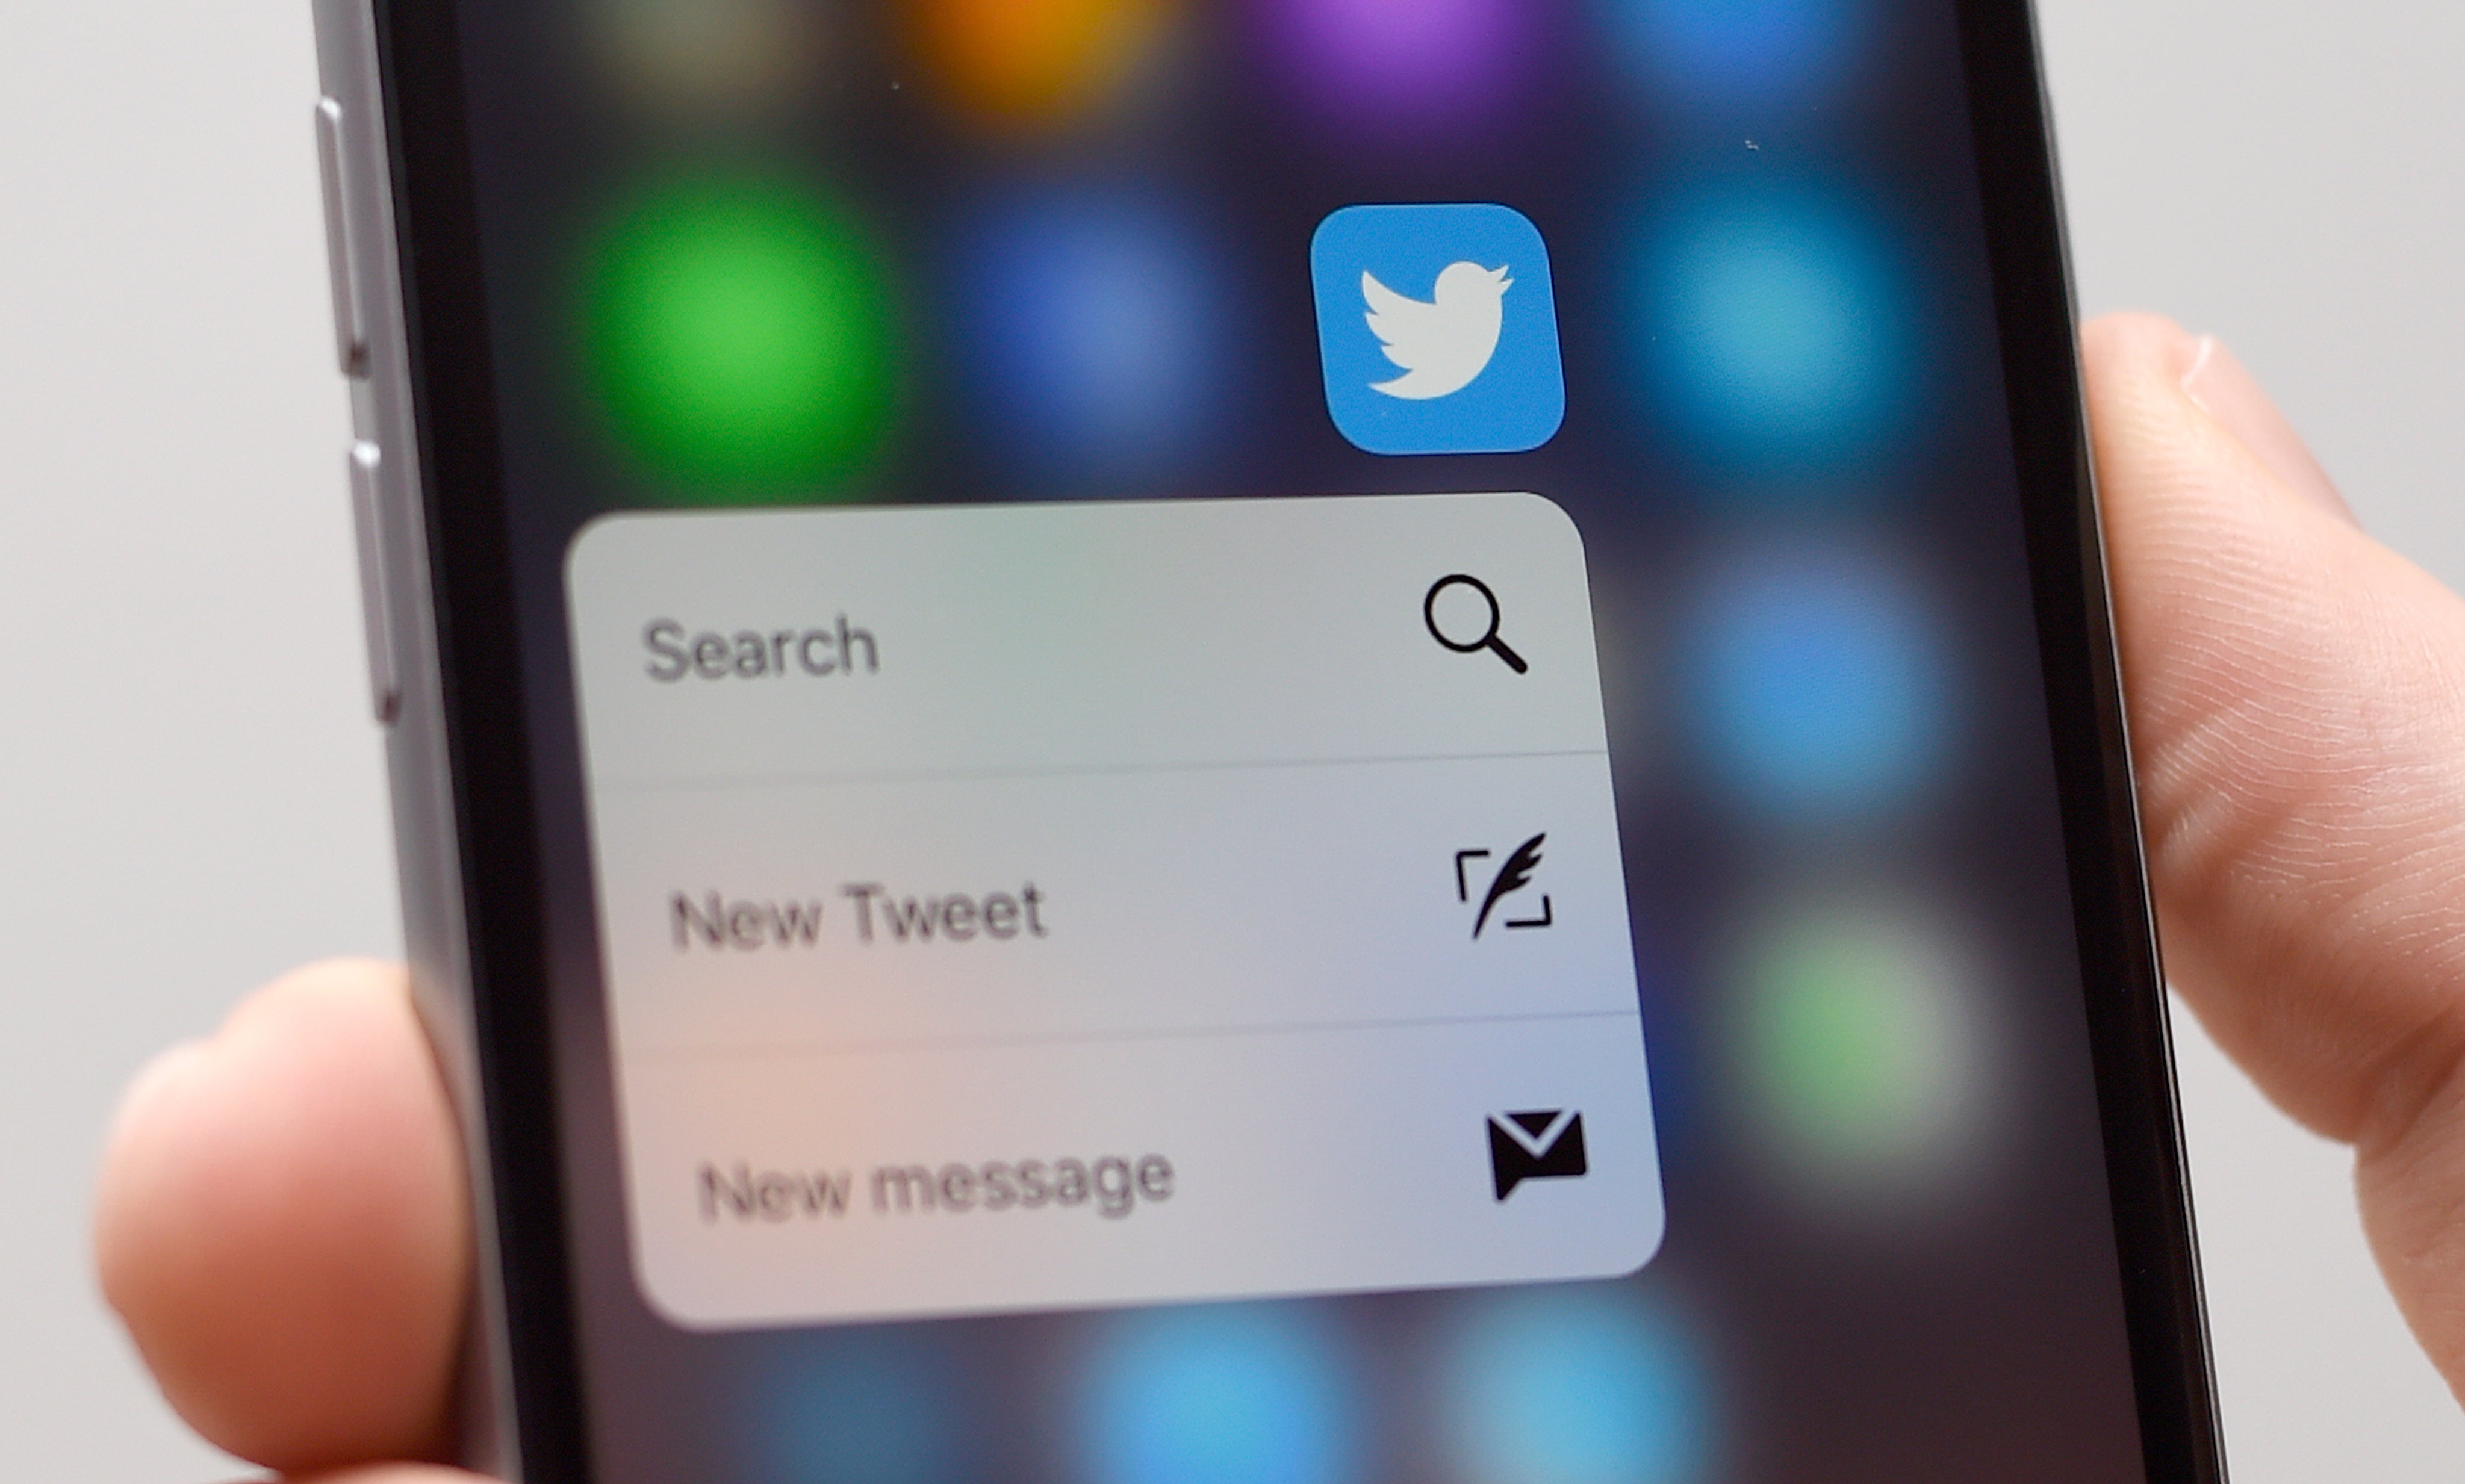 The Twitter app on an Apple iPhone 6s (PA)